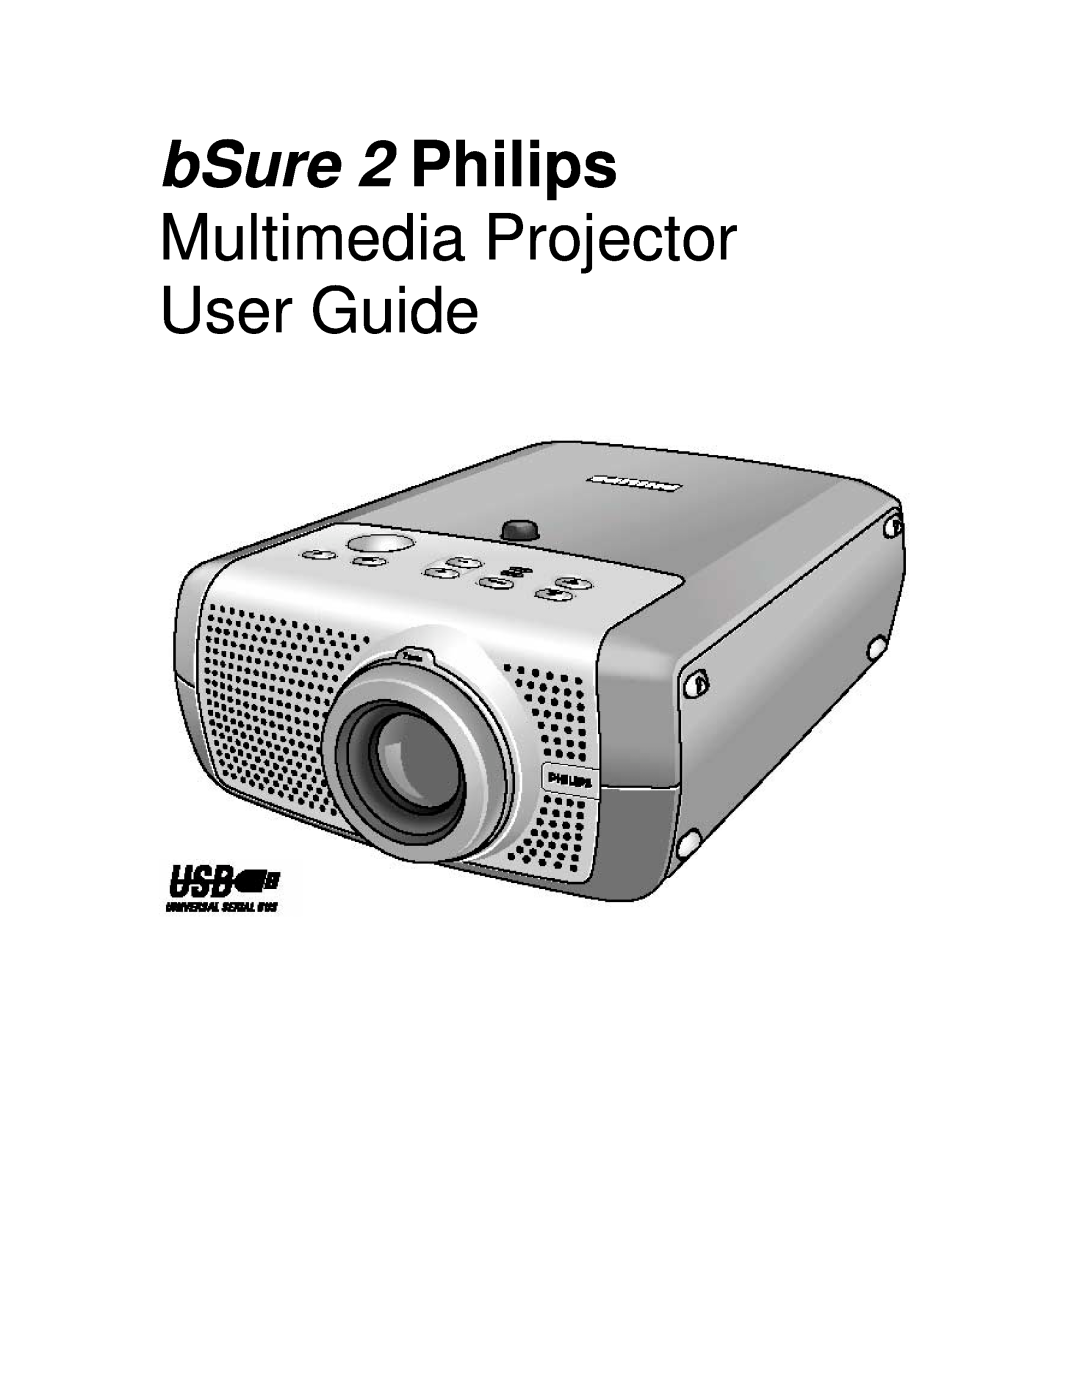 Philips manual bSure 2 Philips, Multimedia Projector User Guide 